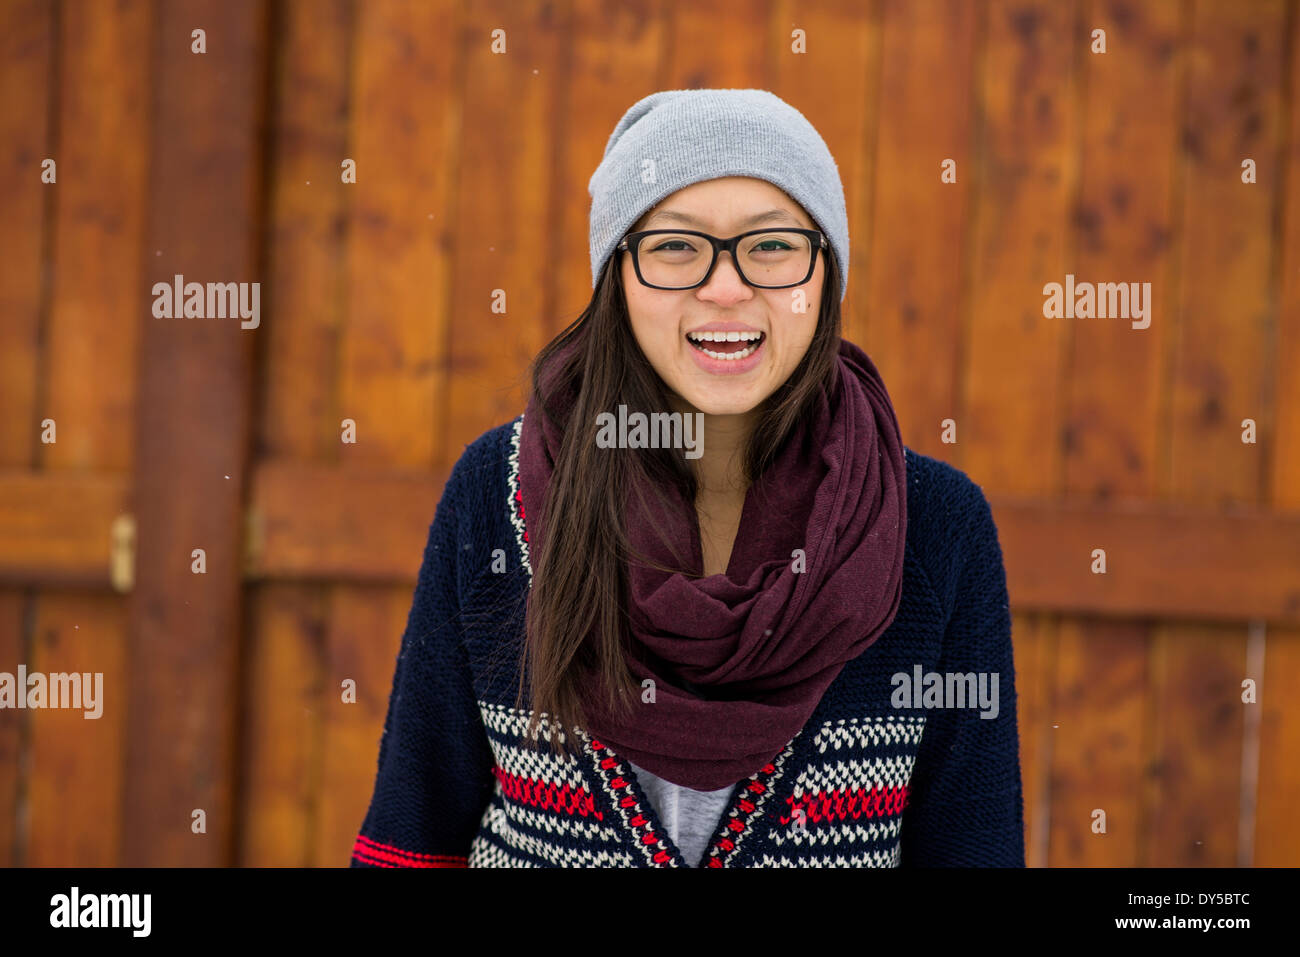 Portrait of young woman in front of wooden fence Stock Photo